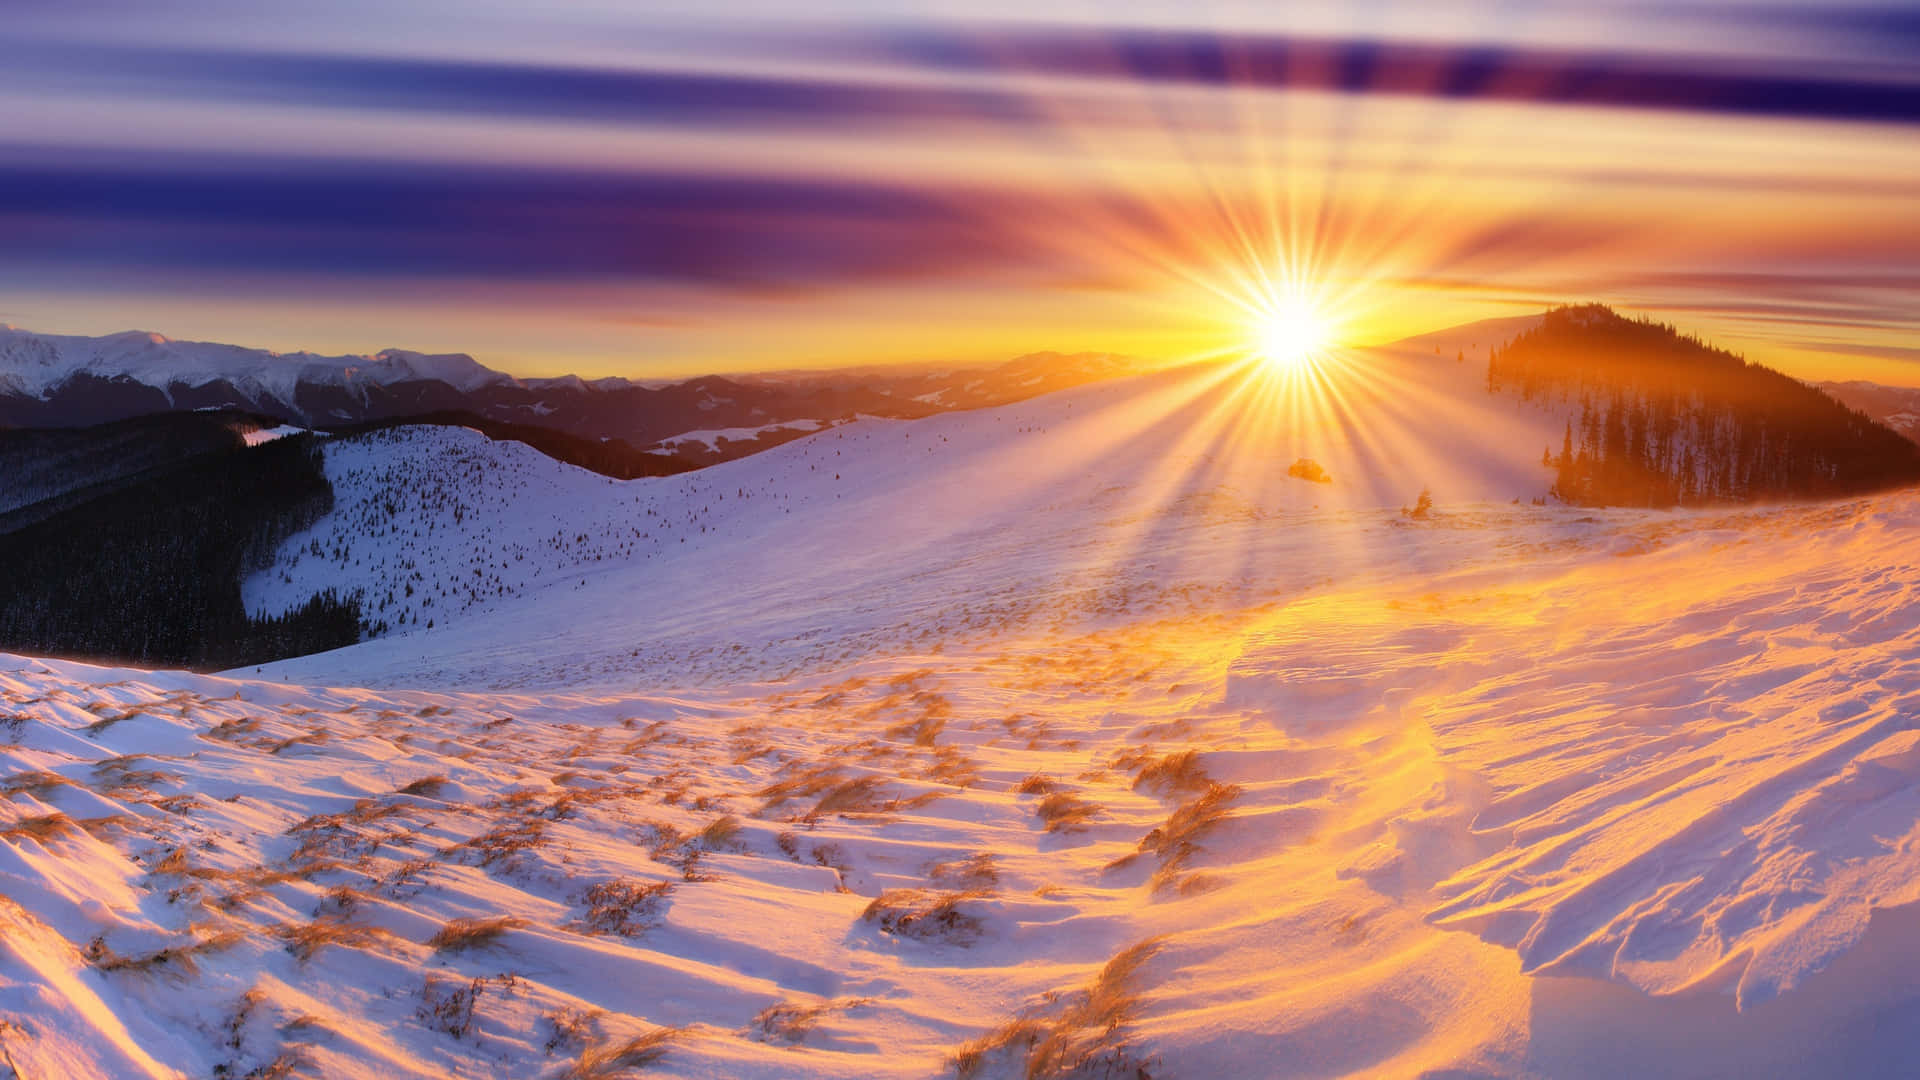 Sunshine Over Snowy Mountain pictures